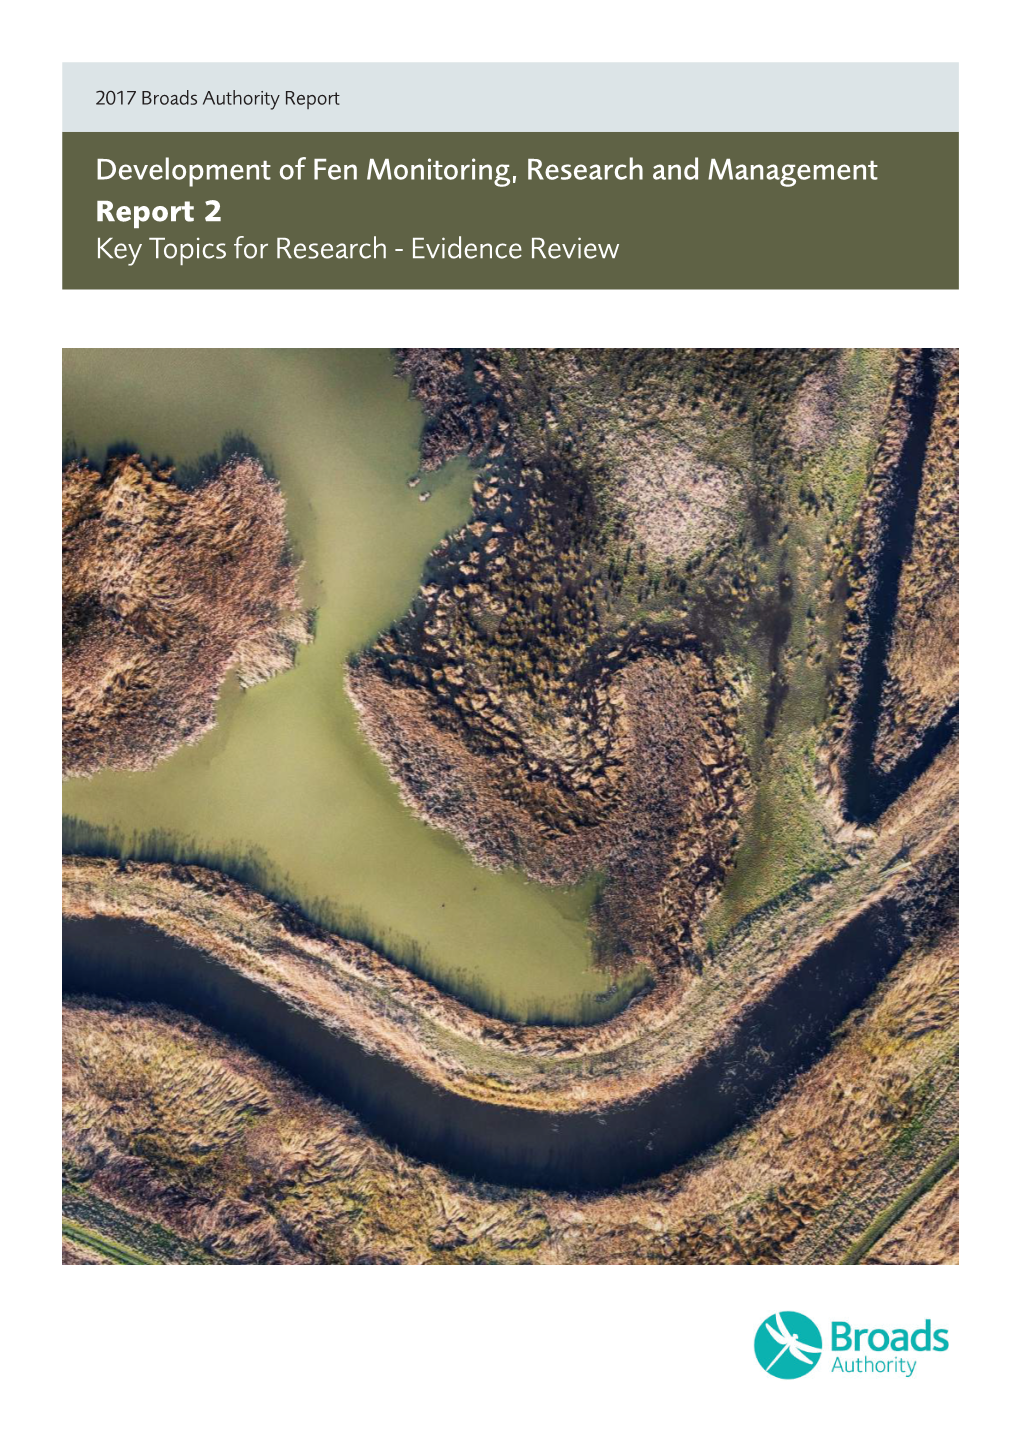 Report 2 Key Topics for Research, Evidence Review